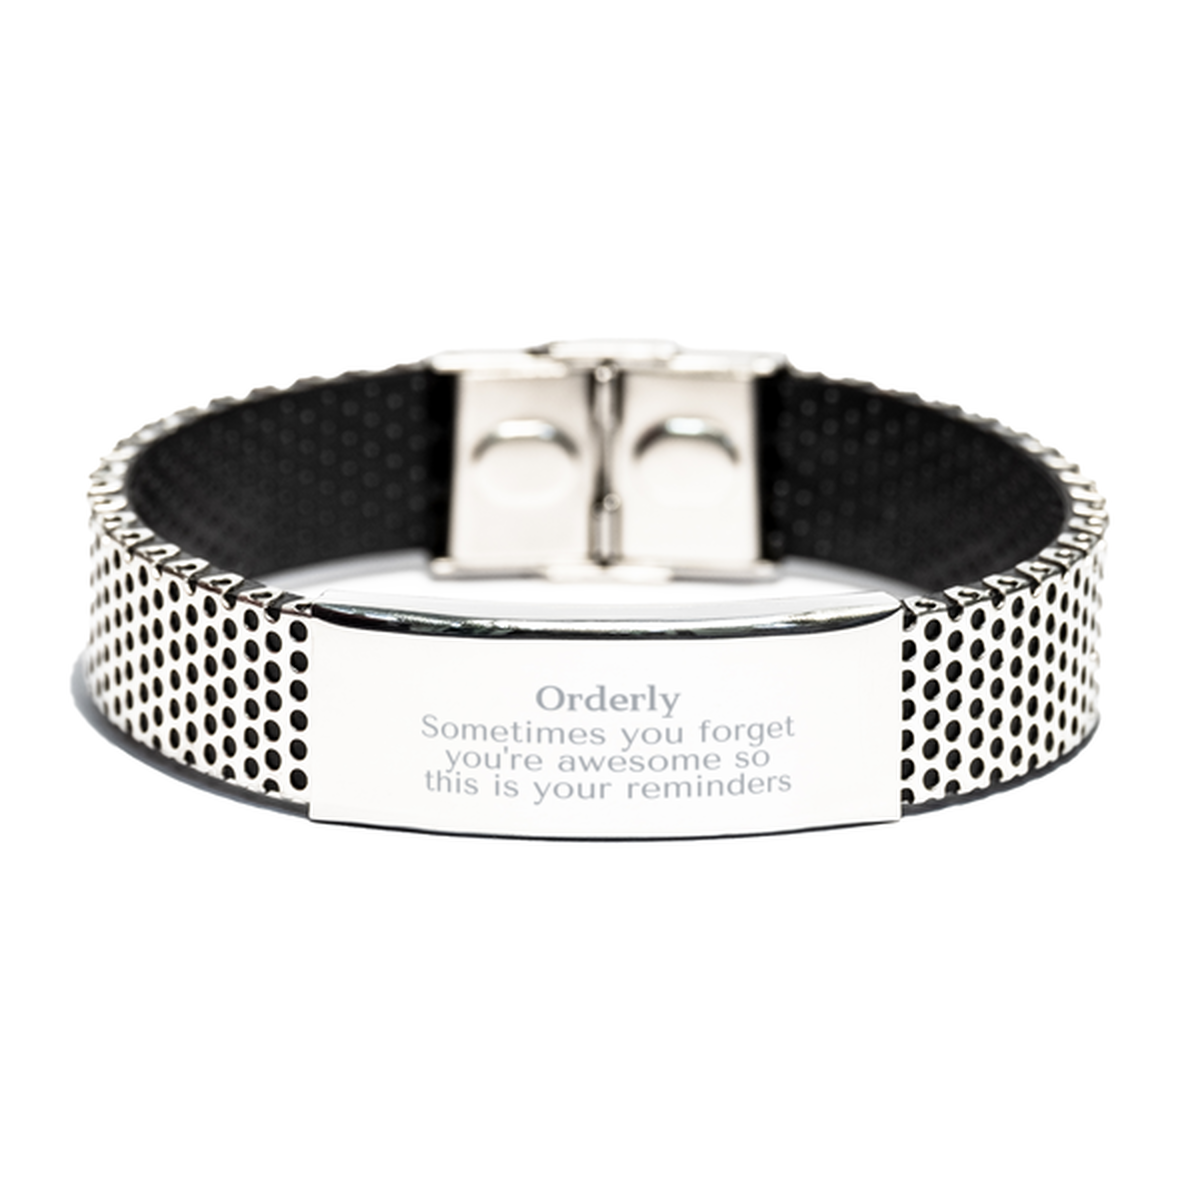 Sentimental Orderly Stainless Steel Bracelet, Orderly Sometimes you forget you're awesome so this is your reminders, Graduation Christmas Birthday Gifts for Orderly, Men, Women, Coworkers